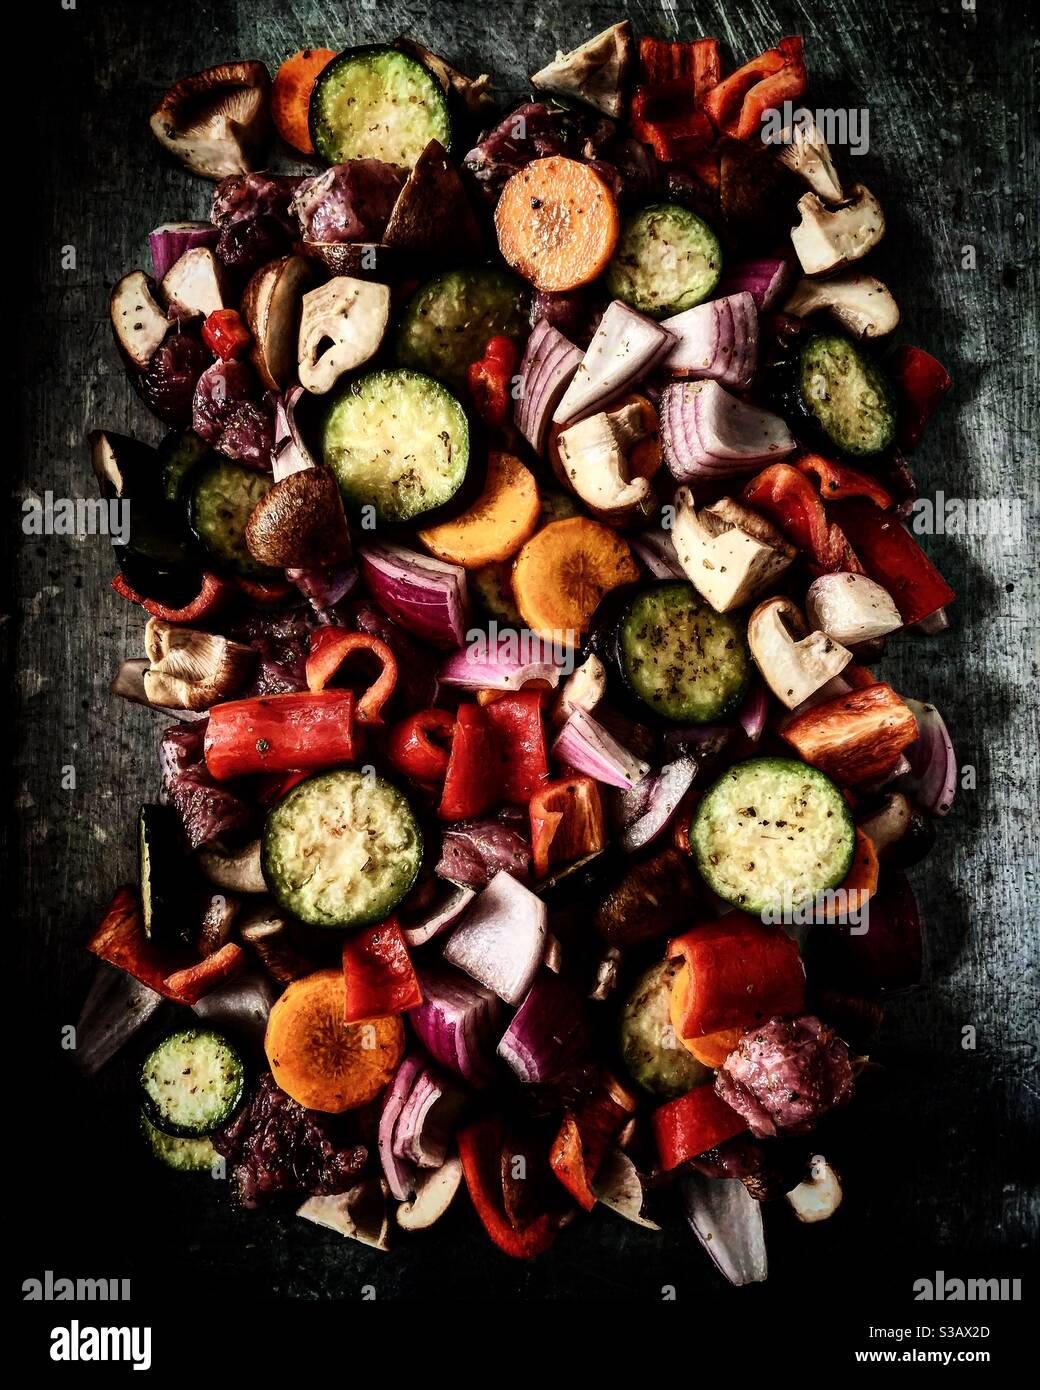 Cooked vegetables Stock Photo